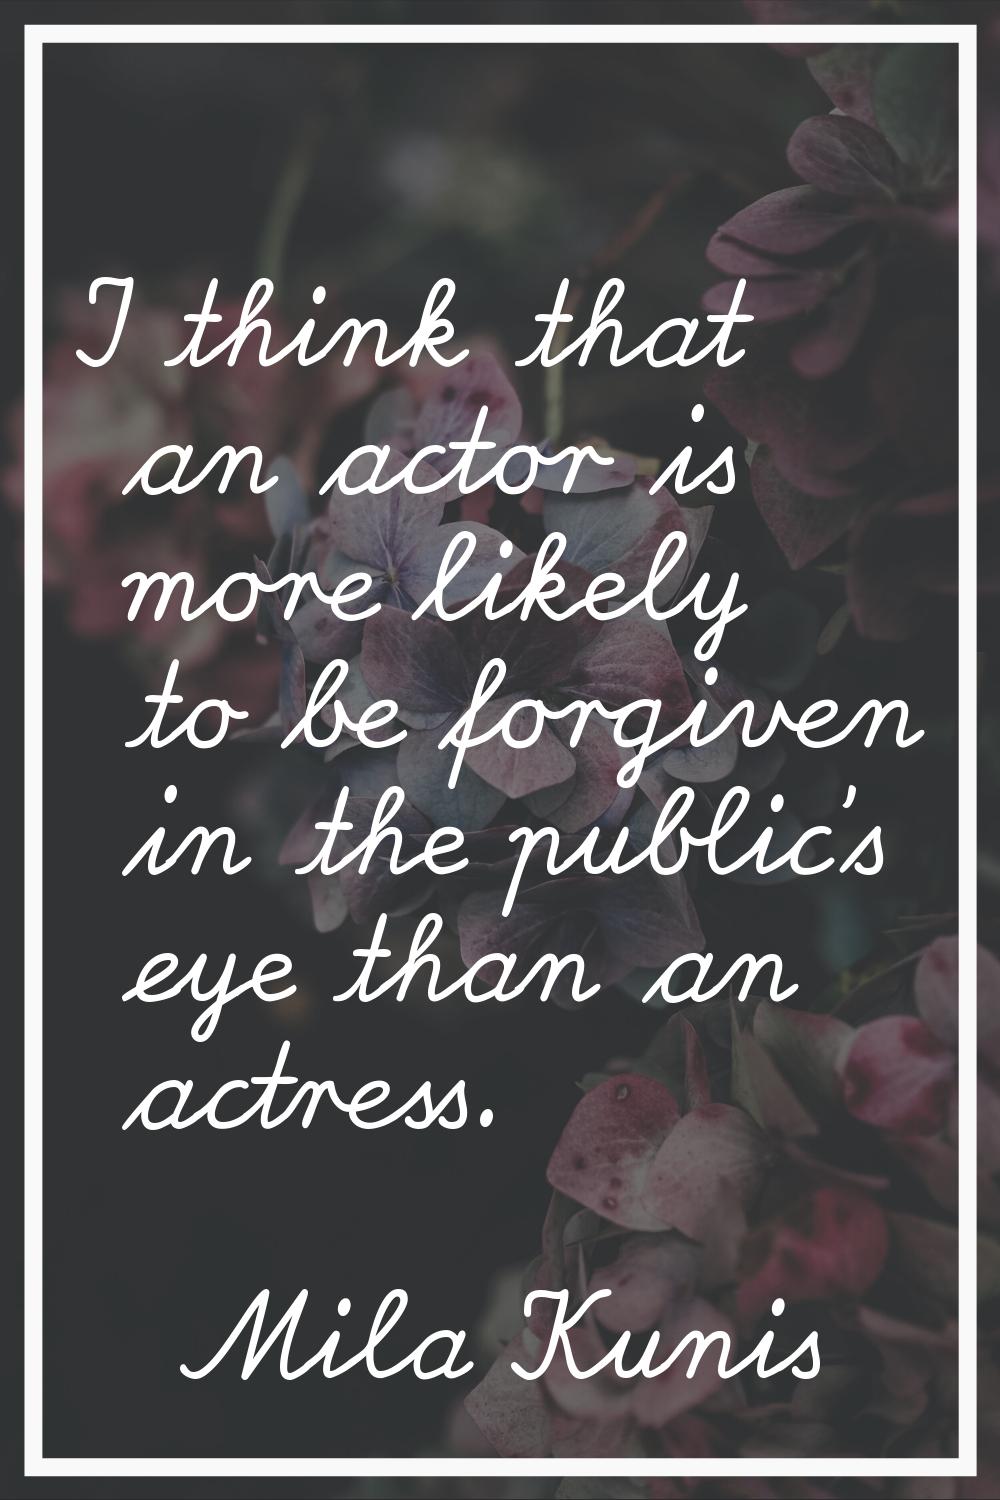 I think that an actor is more likely to be forgiven in the public's eye than an actress.